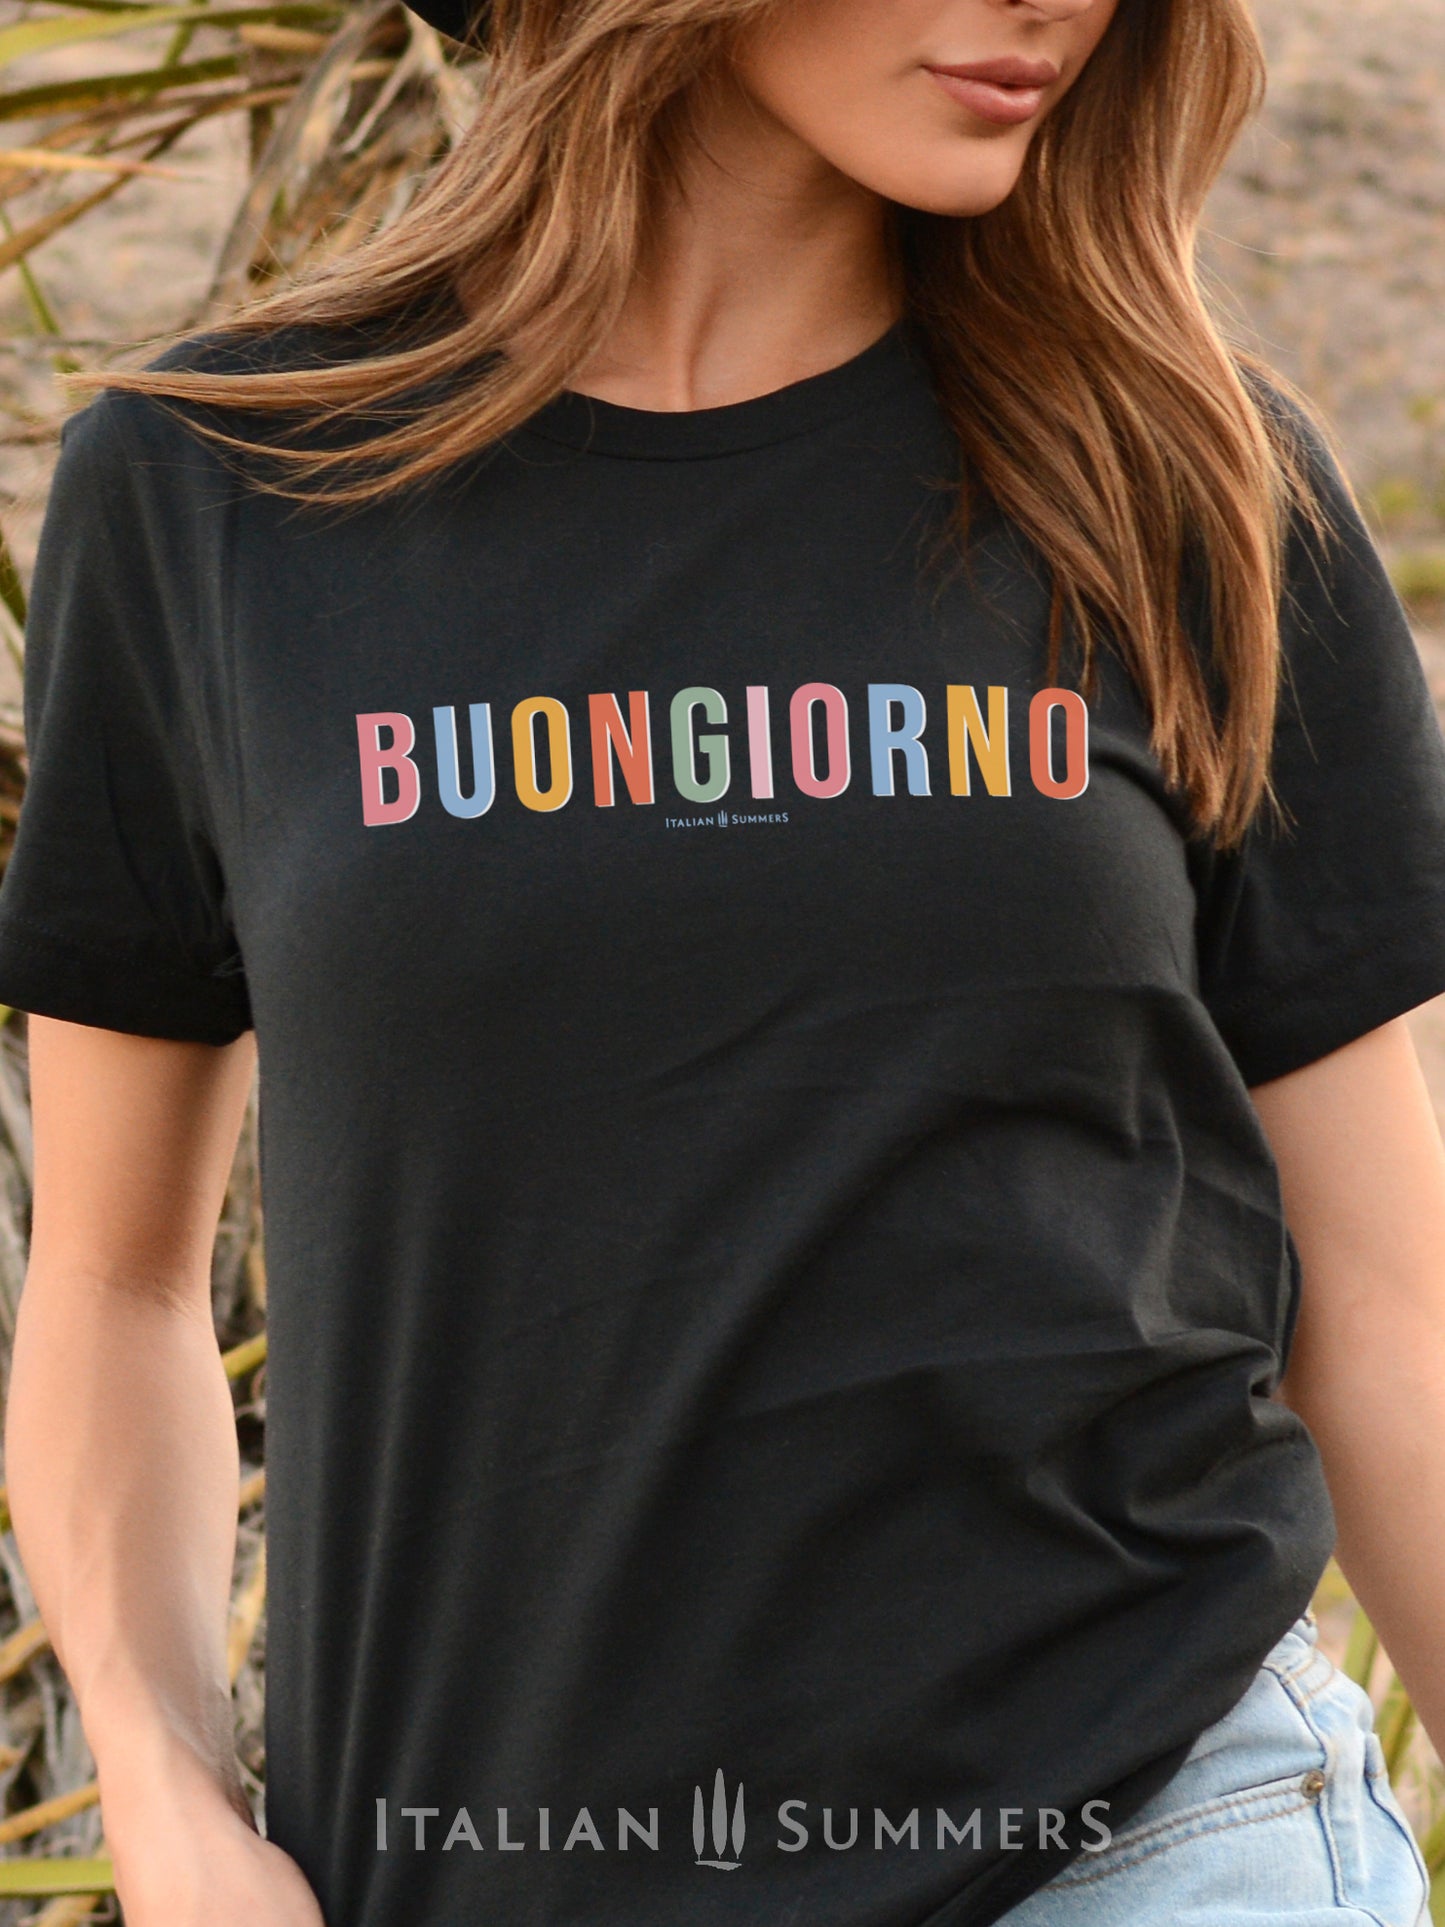 Itay inspired  white cotton T shirt with the Italian phrase " Buongiorno" printed in different soft pastel colors for each letter. A  subtle but stylish way to both wink at all Italy-lovers and to give a nice positive greeting to whomever reads it.